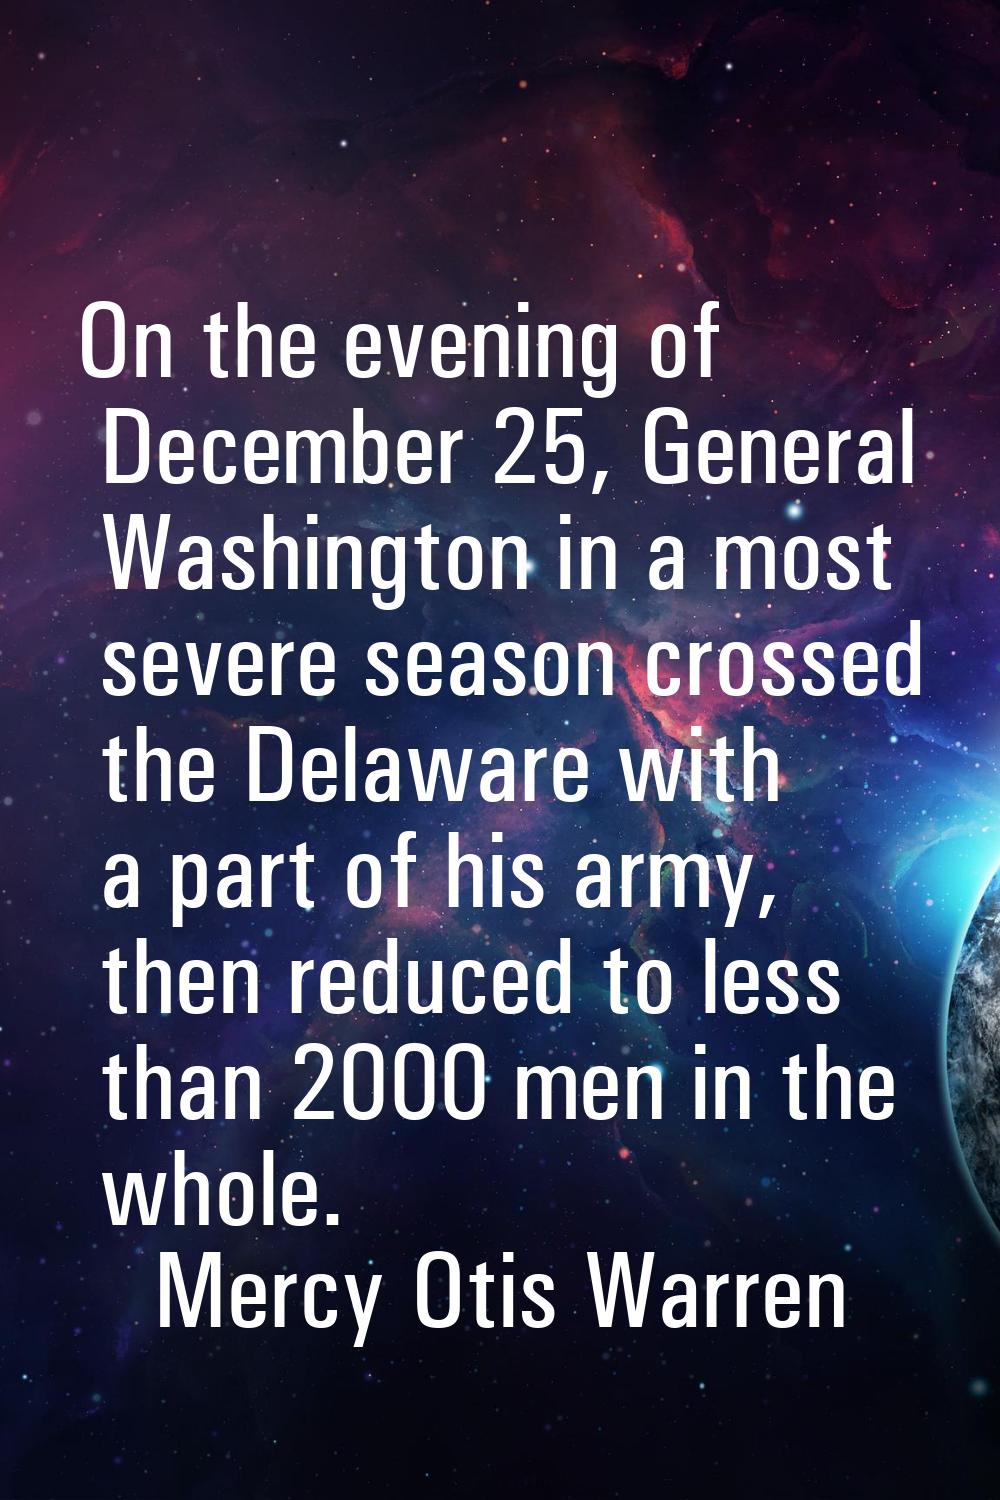 On the evening of December 25, General Washington in a most severe season crossed the Delaware with